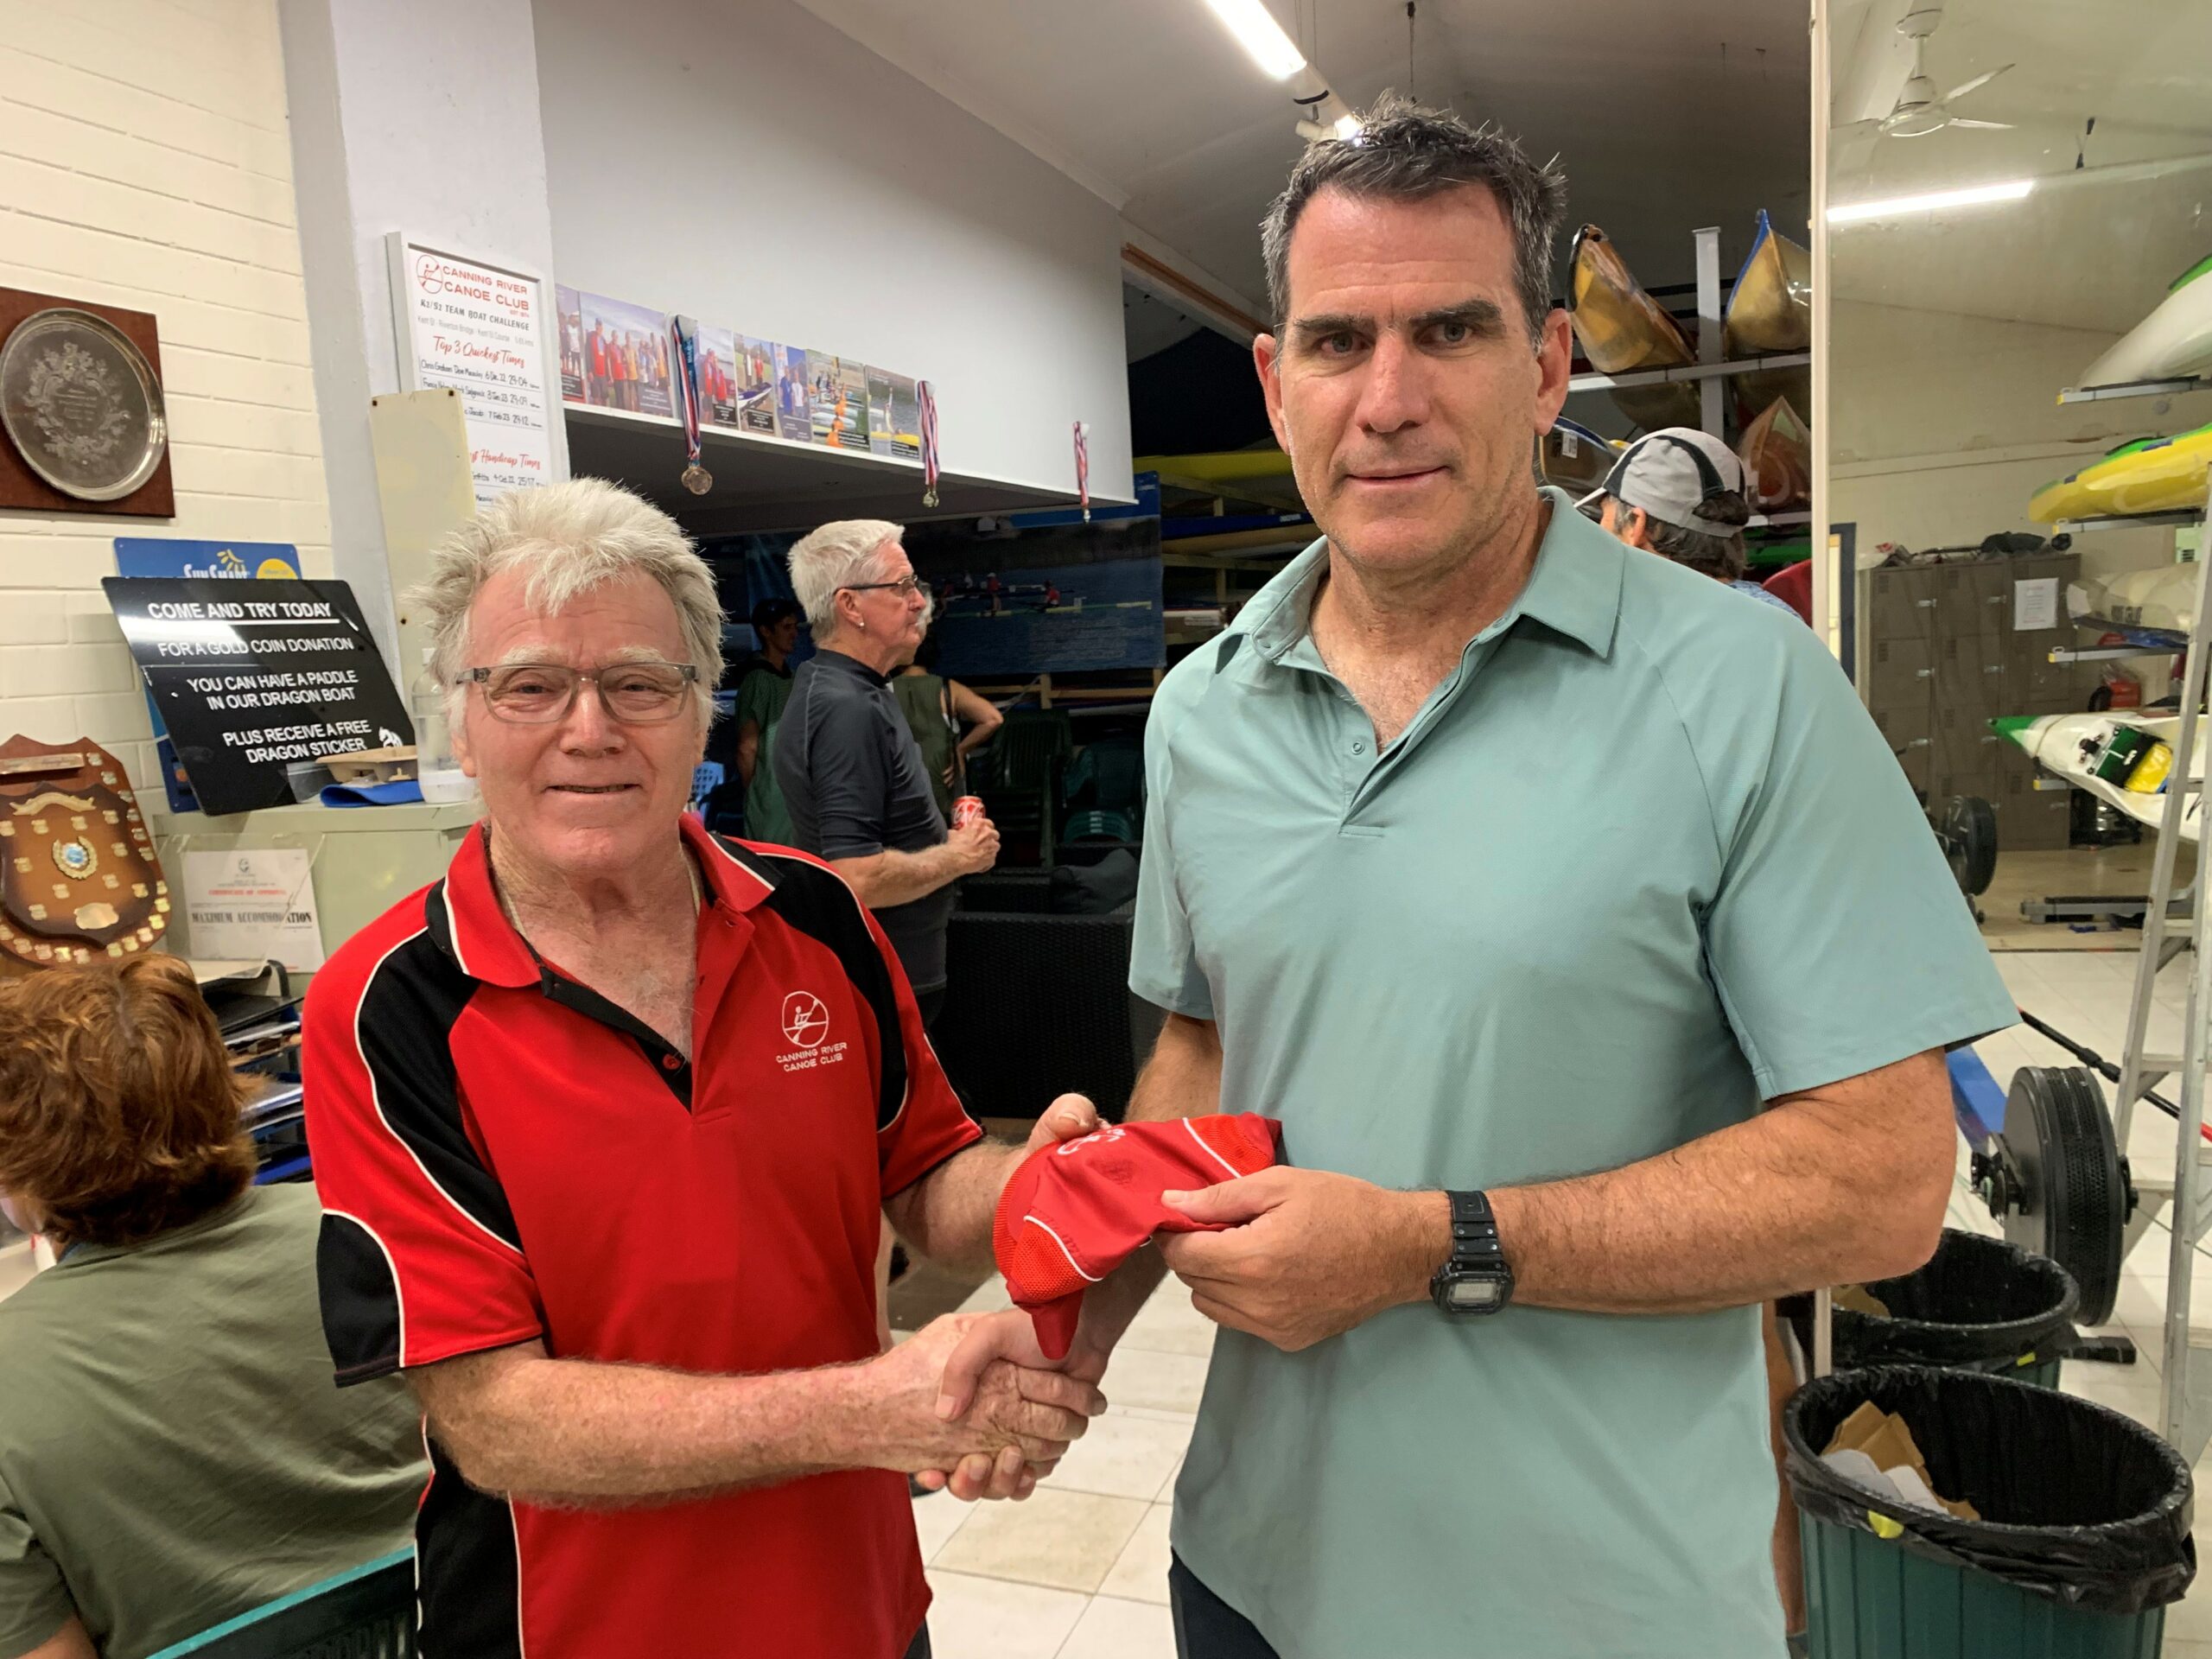 Tuesday 14th February 2023 Valentines Day paddle : Tonight’s photo shows David Gardiner presenting Stuart Hyde with a movie voucher.